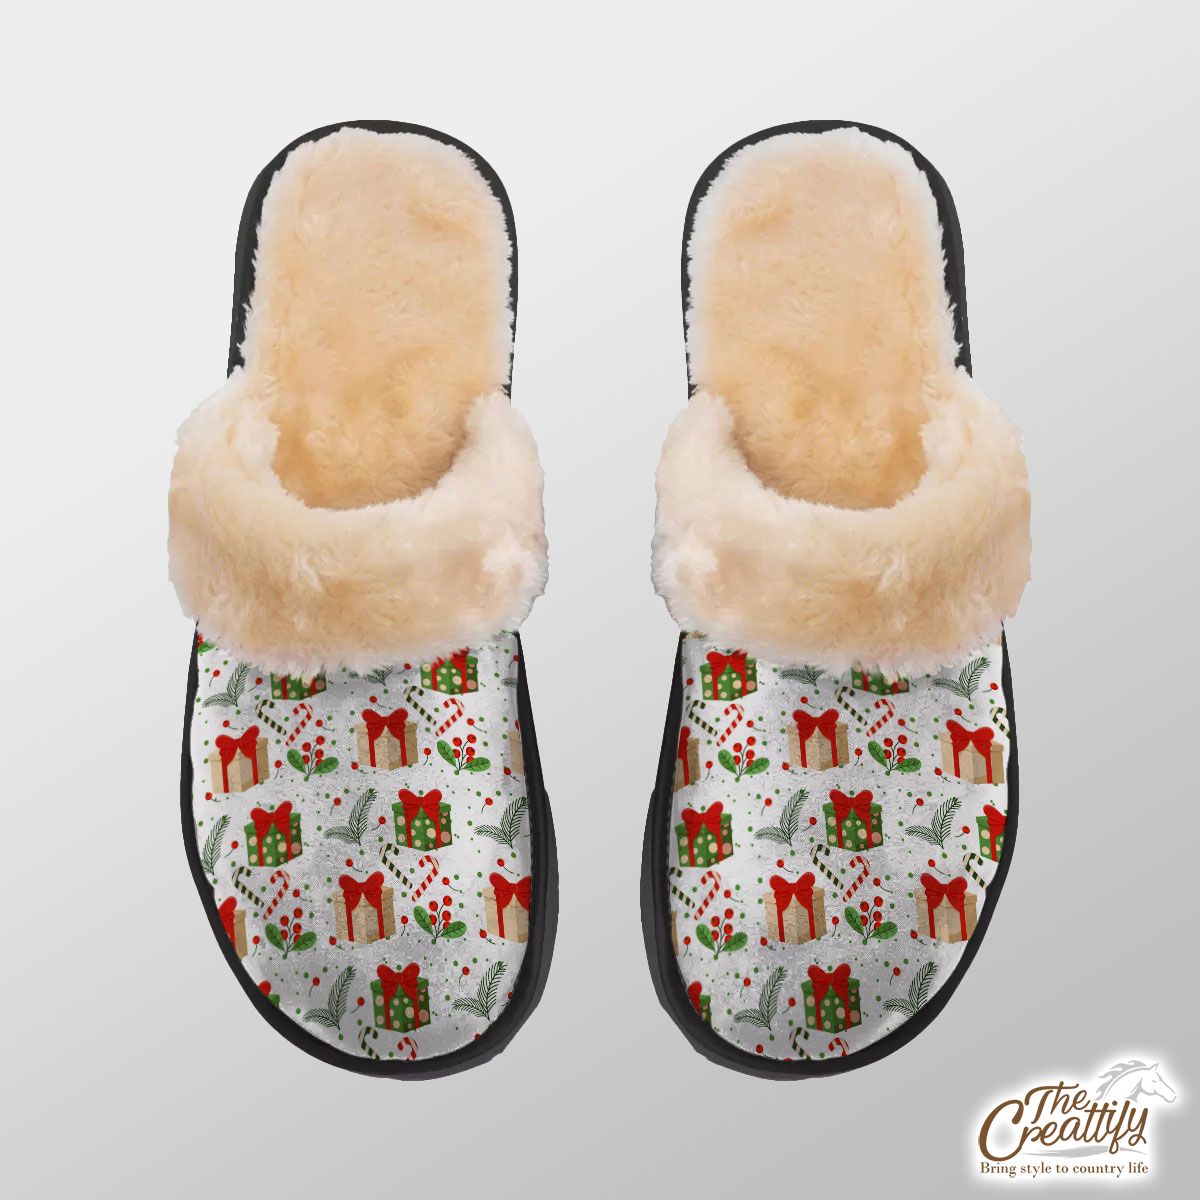 Christmas Gifts And Red Berries Home Plush Slippers